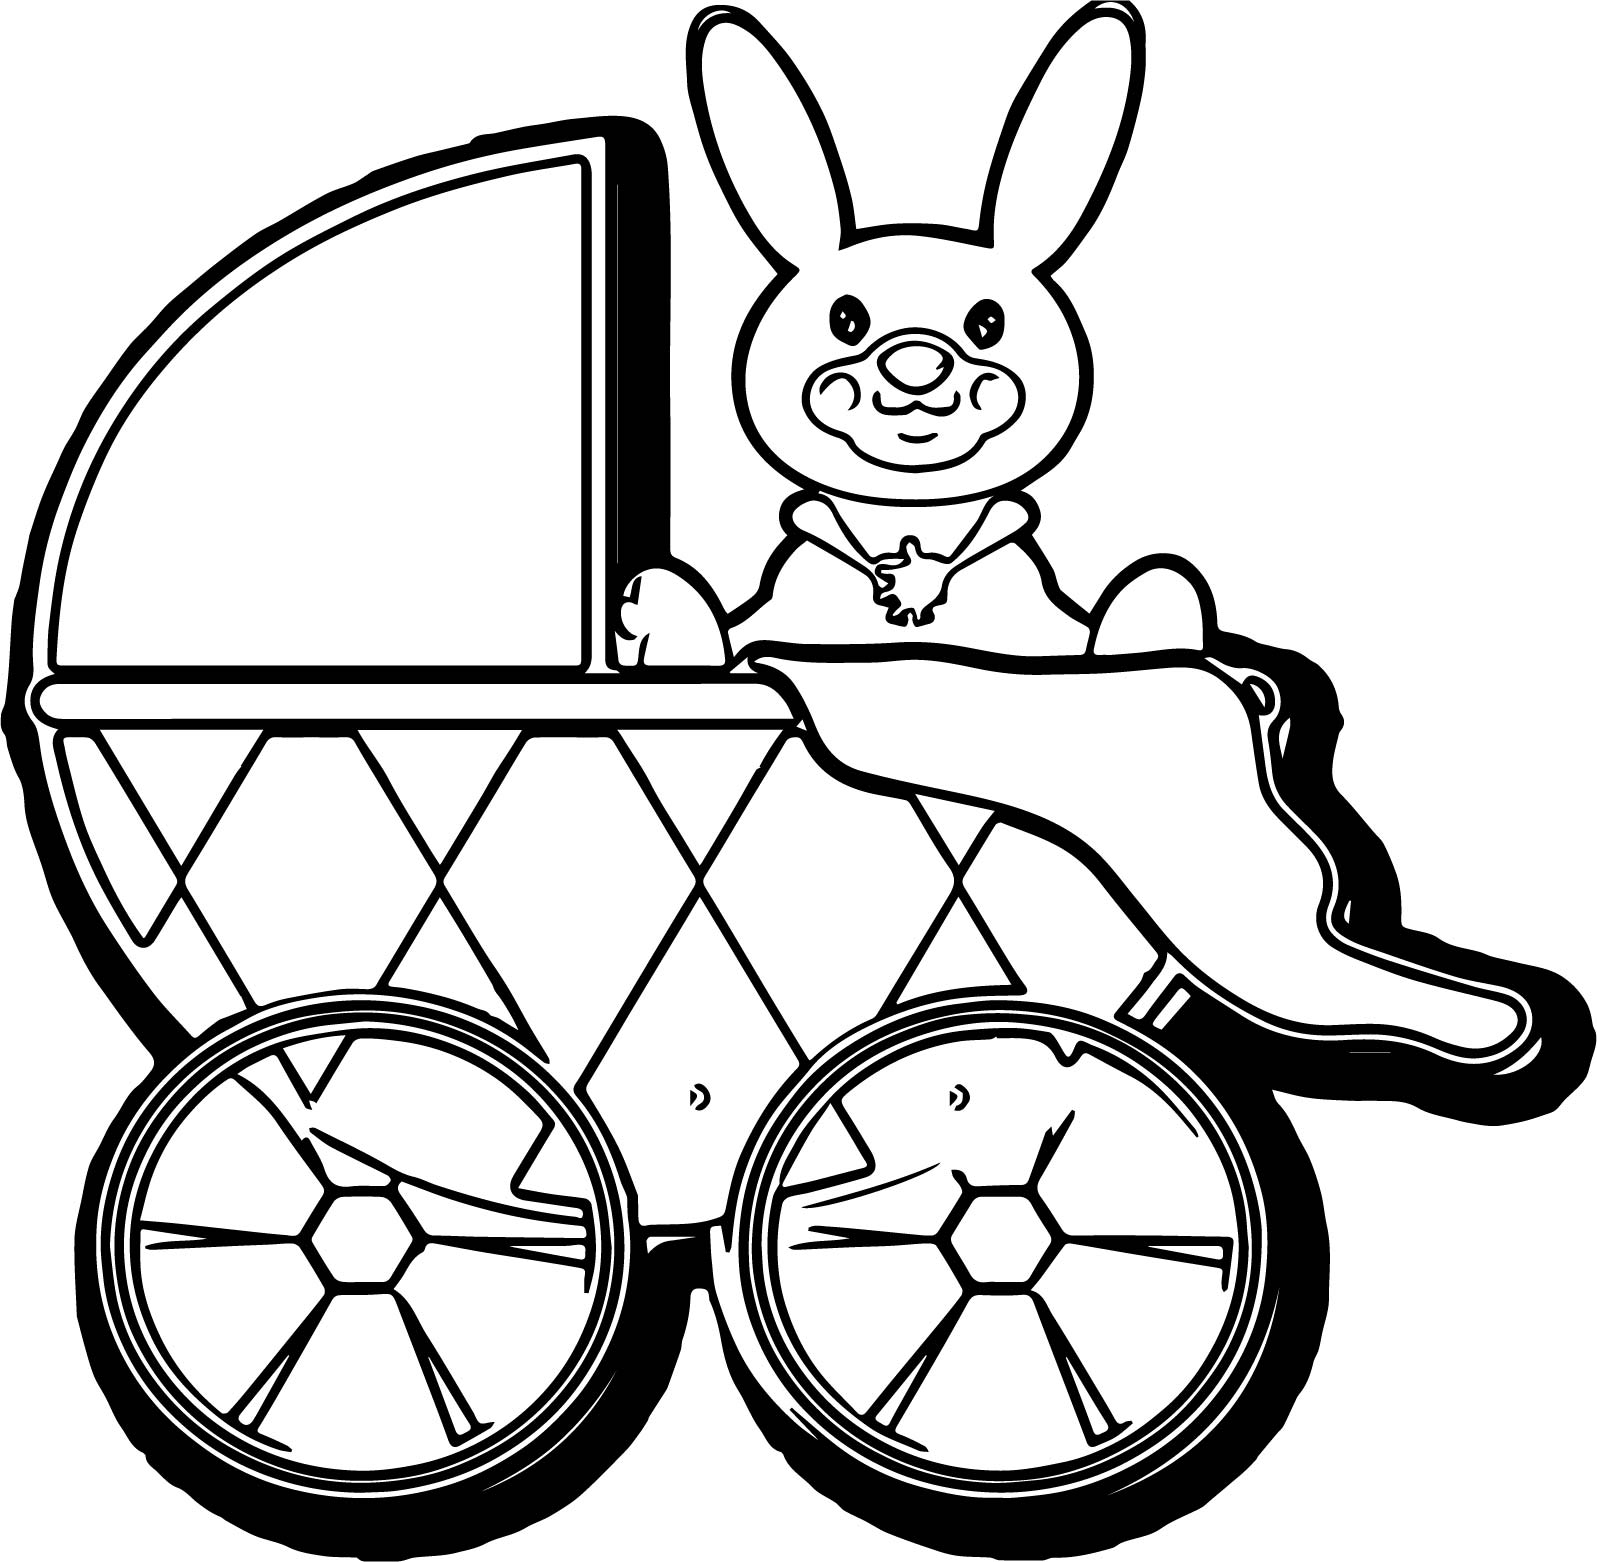 Download Stroller Coloring Pages to download and print for free